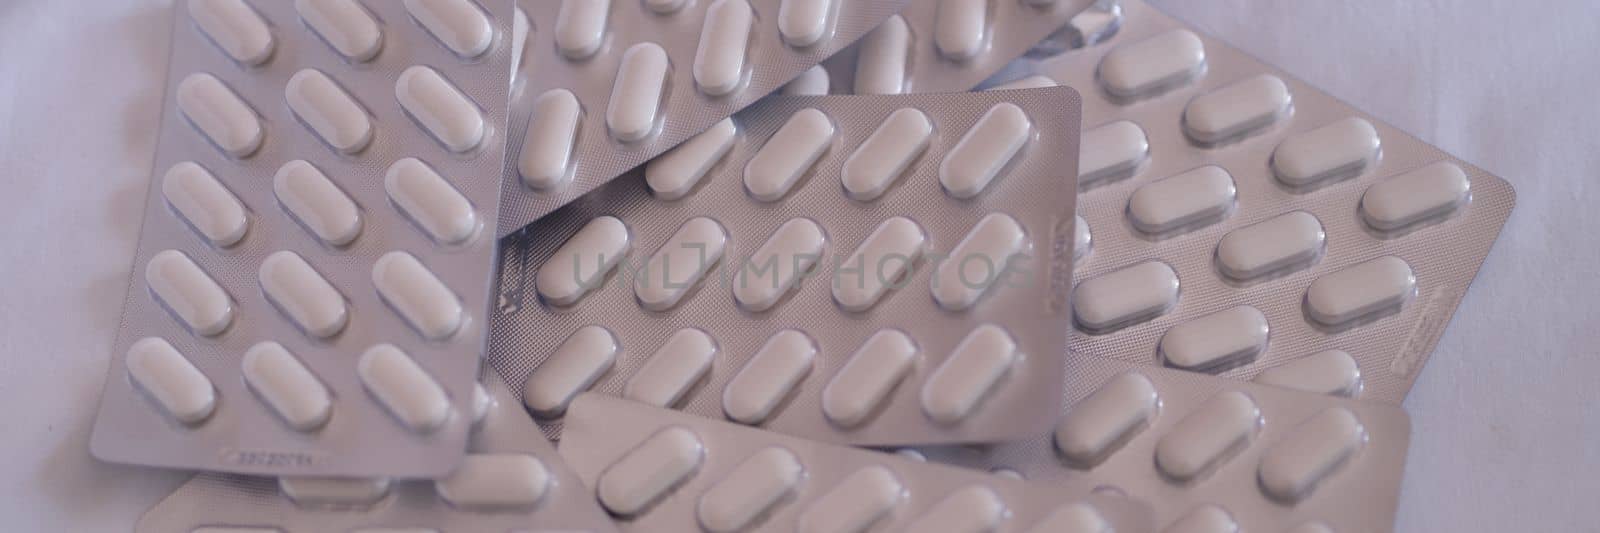 Pile of medical pills in blister pack closeup by kuprevich